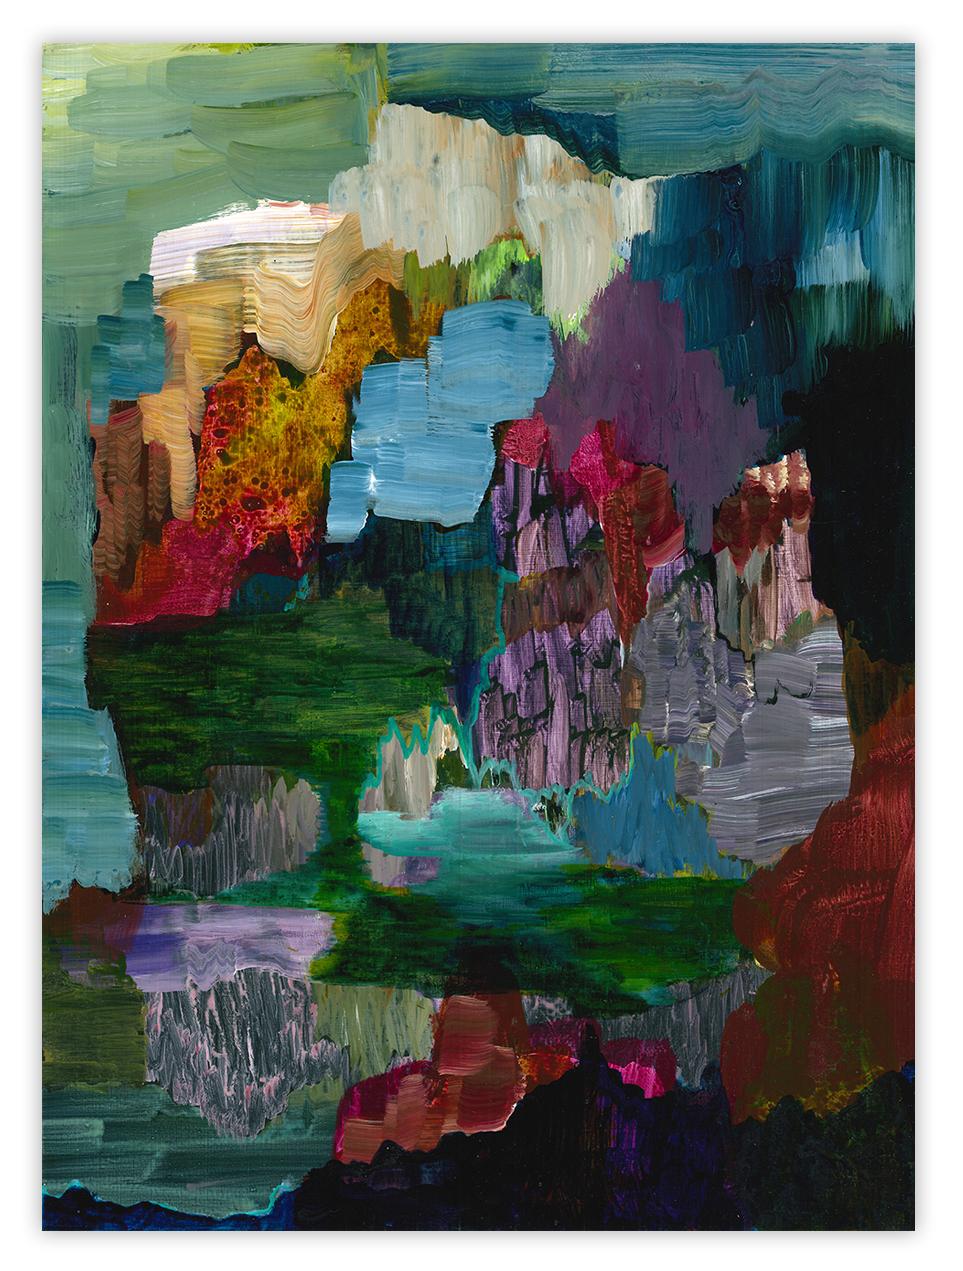 P17.2024 (Abstract Painting)
Acrylic on Hahnemuhle paper - unframed

Antony Densham, an abstract artist based in Aotearoa, New Zealand, is renowned for his distinctive approach to capturing the ephemeral qualities of the landscape. His artistic